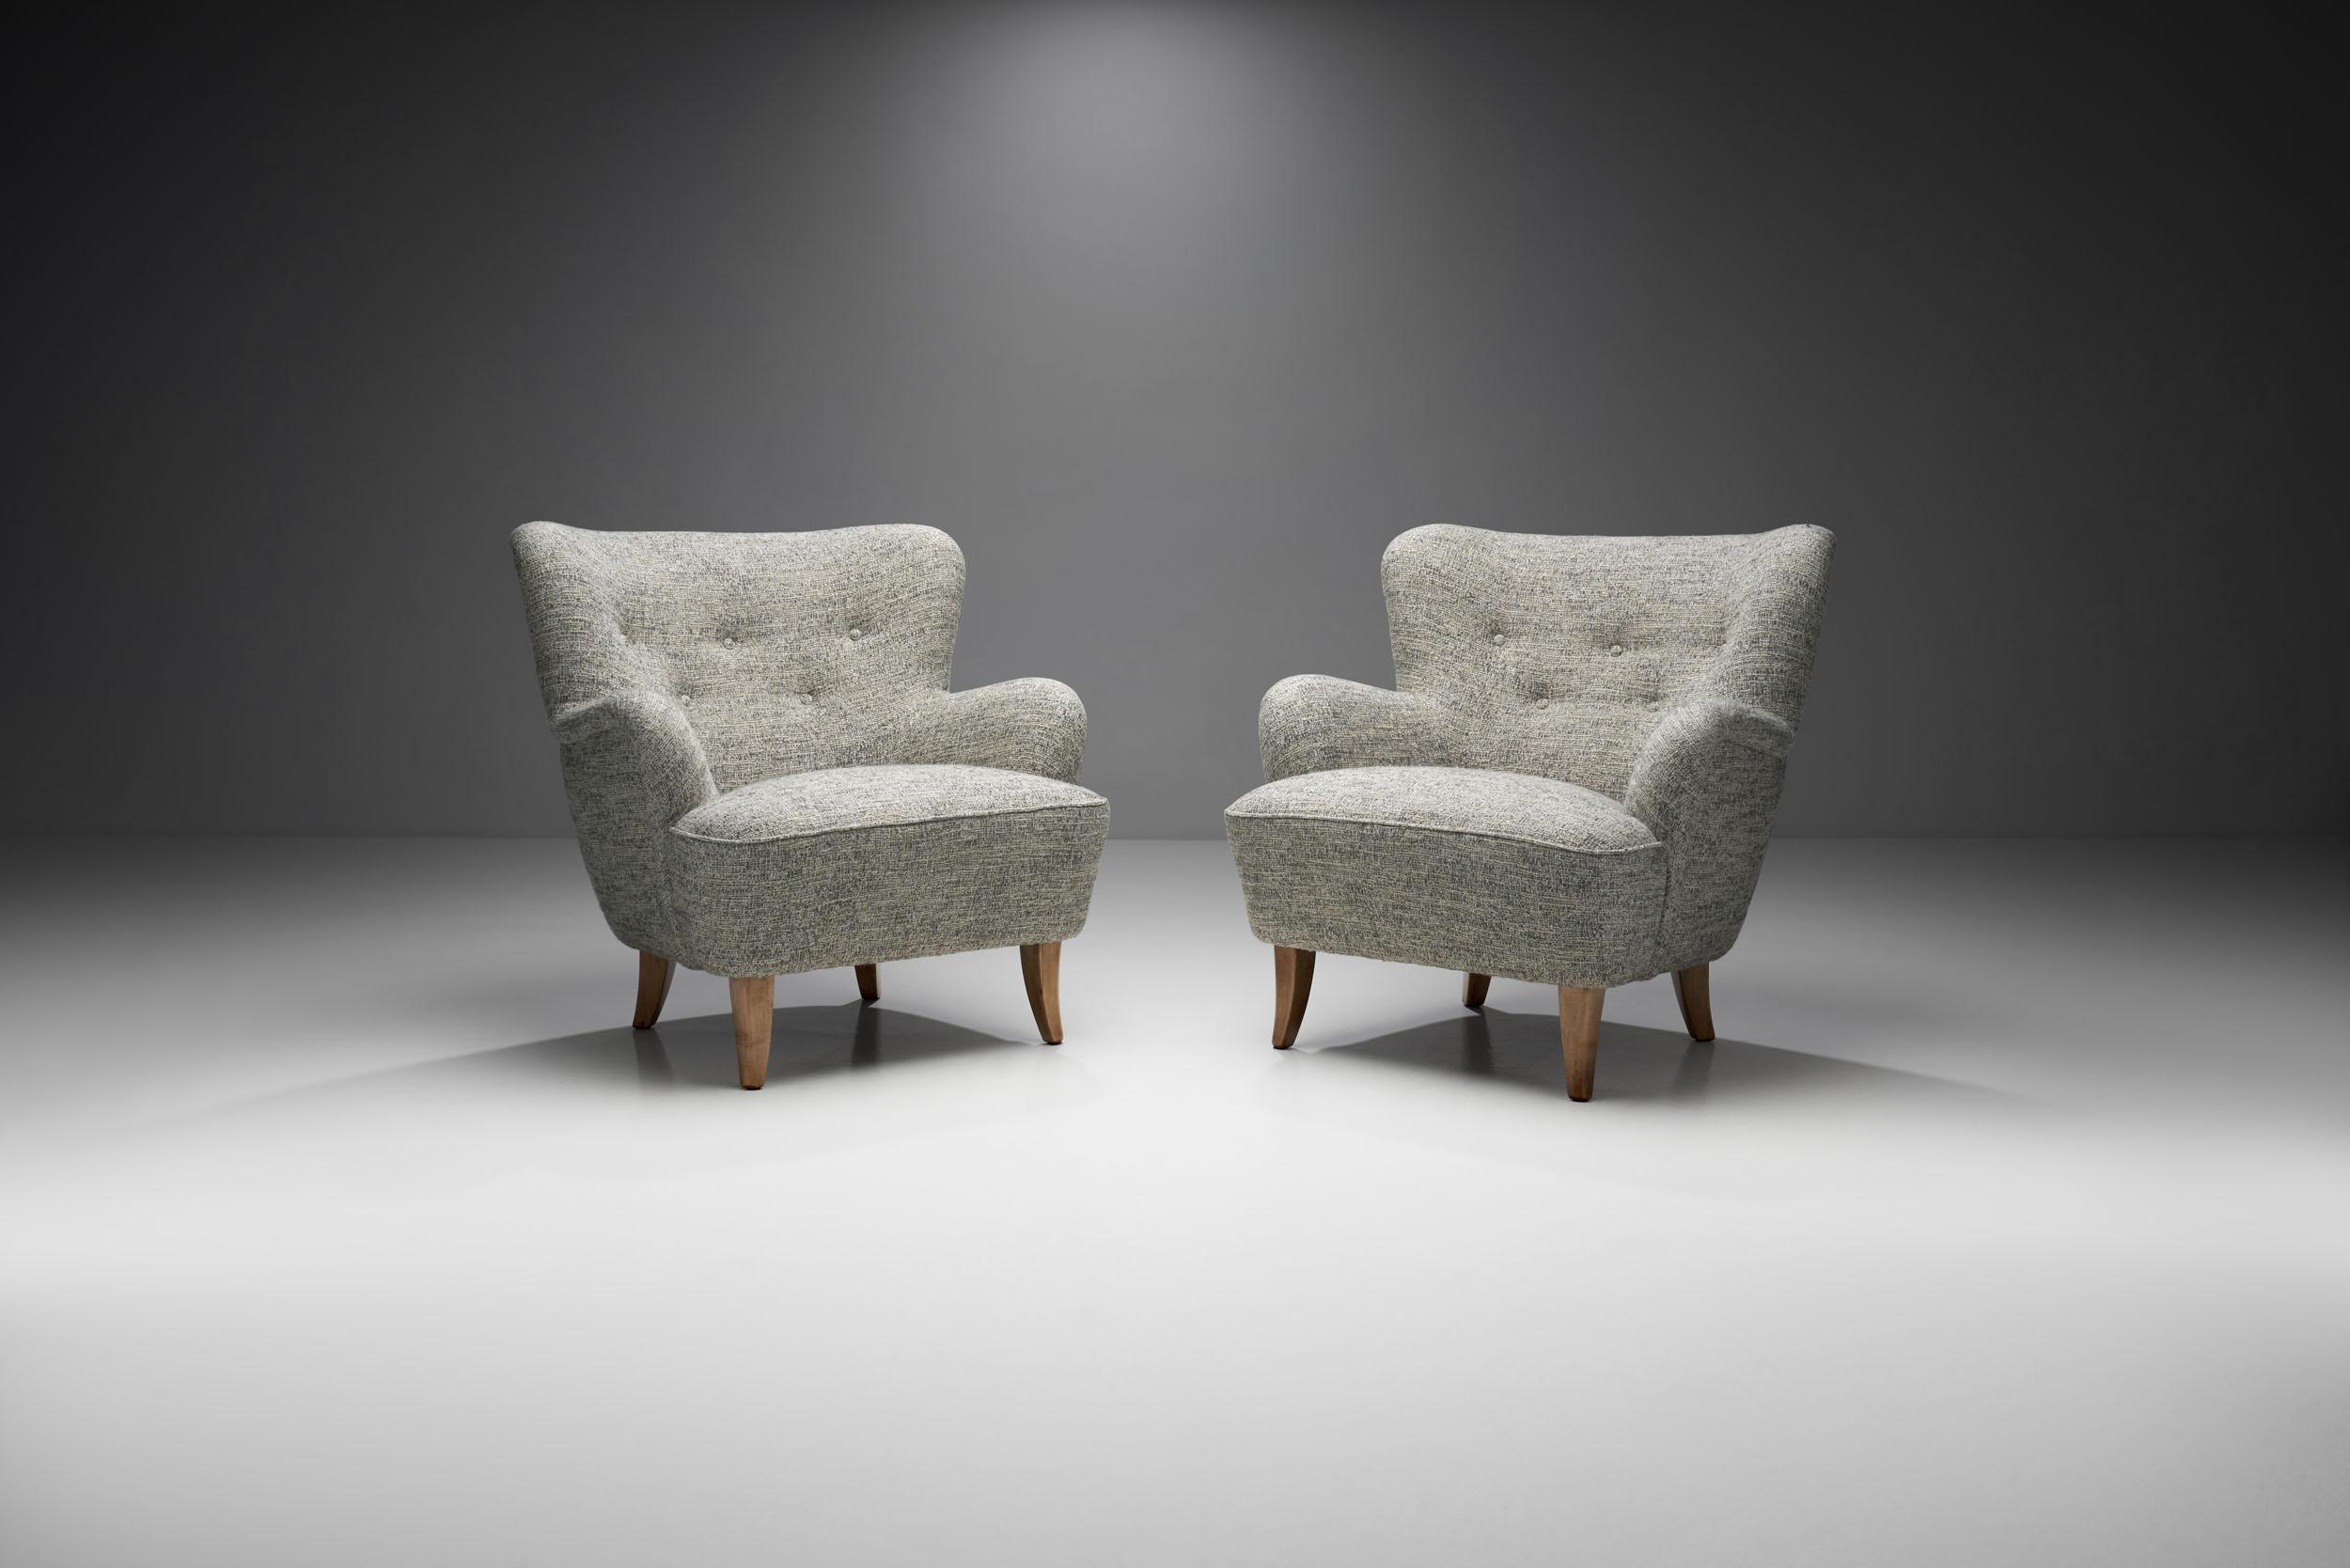 The “Laila” model by the Finnish designer Ilmari Lappalainen originates from 1948, with the earliest original drawings kept in the Lahti City Museum in their Lappalainen Collection.

This pair of “nr. 238” armchairs are from the Finnish designer’s